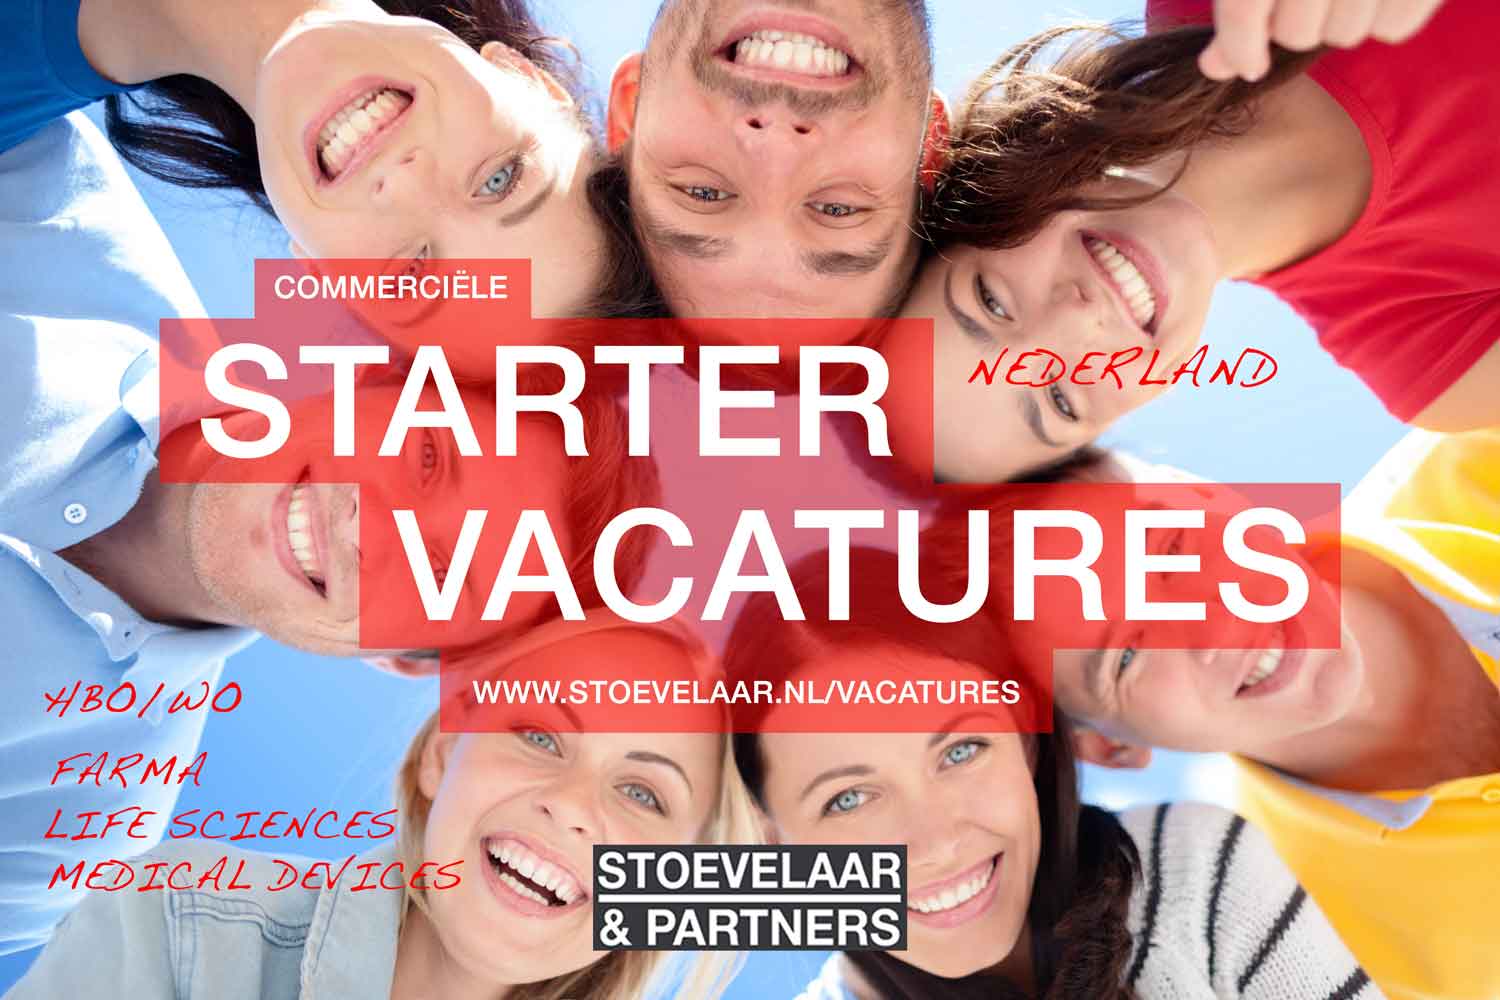 Starter vacatures medical devices farma life sciences